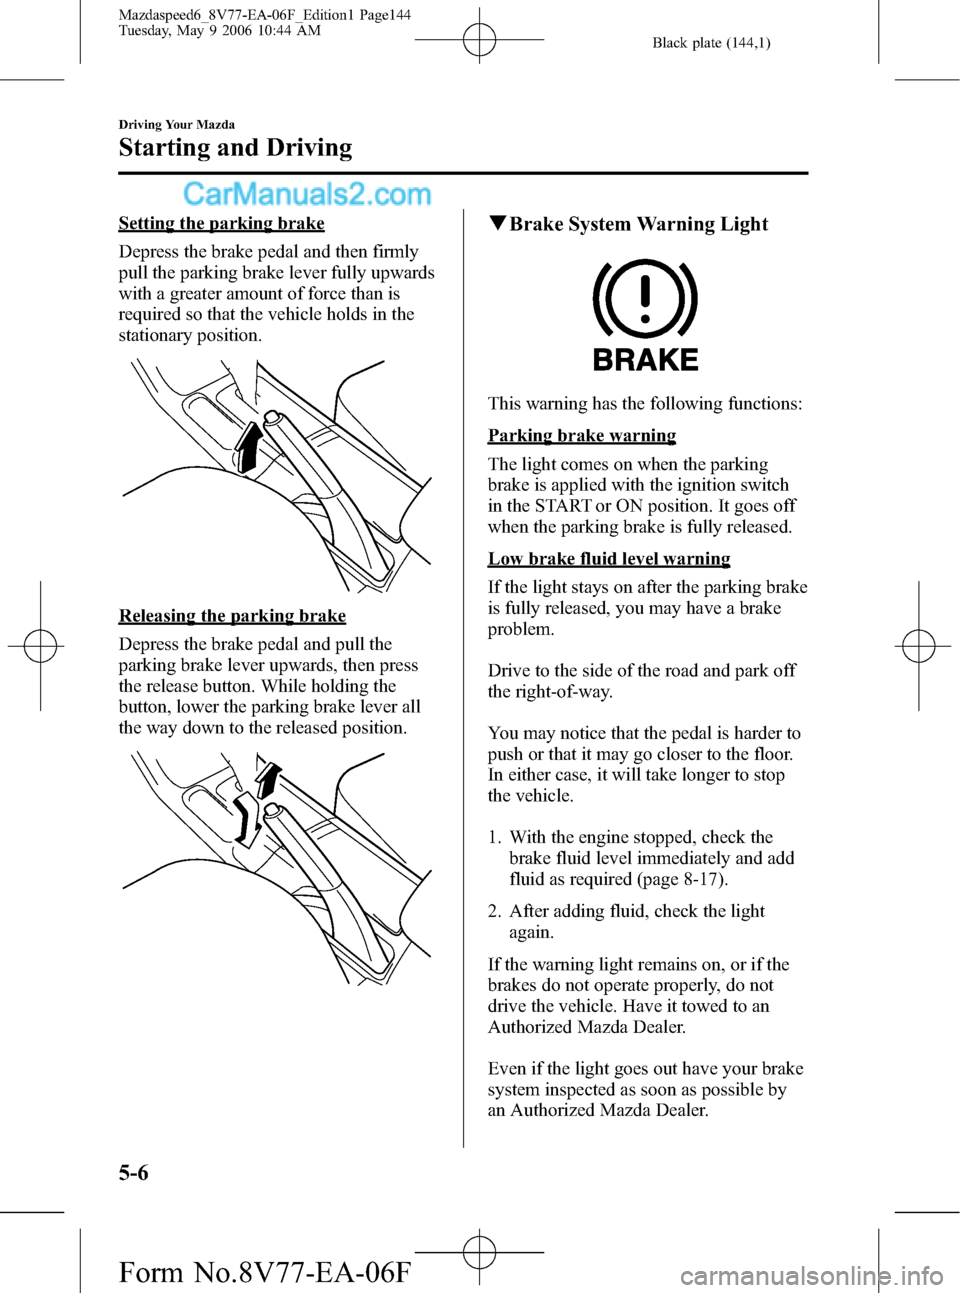 MAZDA MODEL MAZDASPEED 6 2007  Owners Manual (in English) Black plate (144,1)
Setting the parking brake
Depress the brake pedal and then firmly
pull the parking brake lever fully upwards
with a greater amount of force than is
required so that the vehicle hol